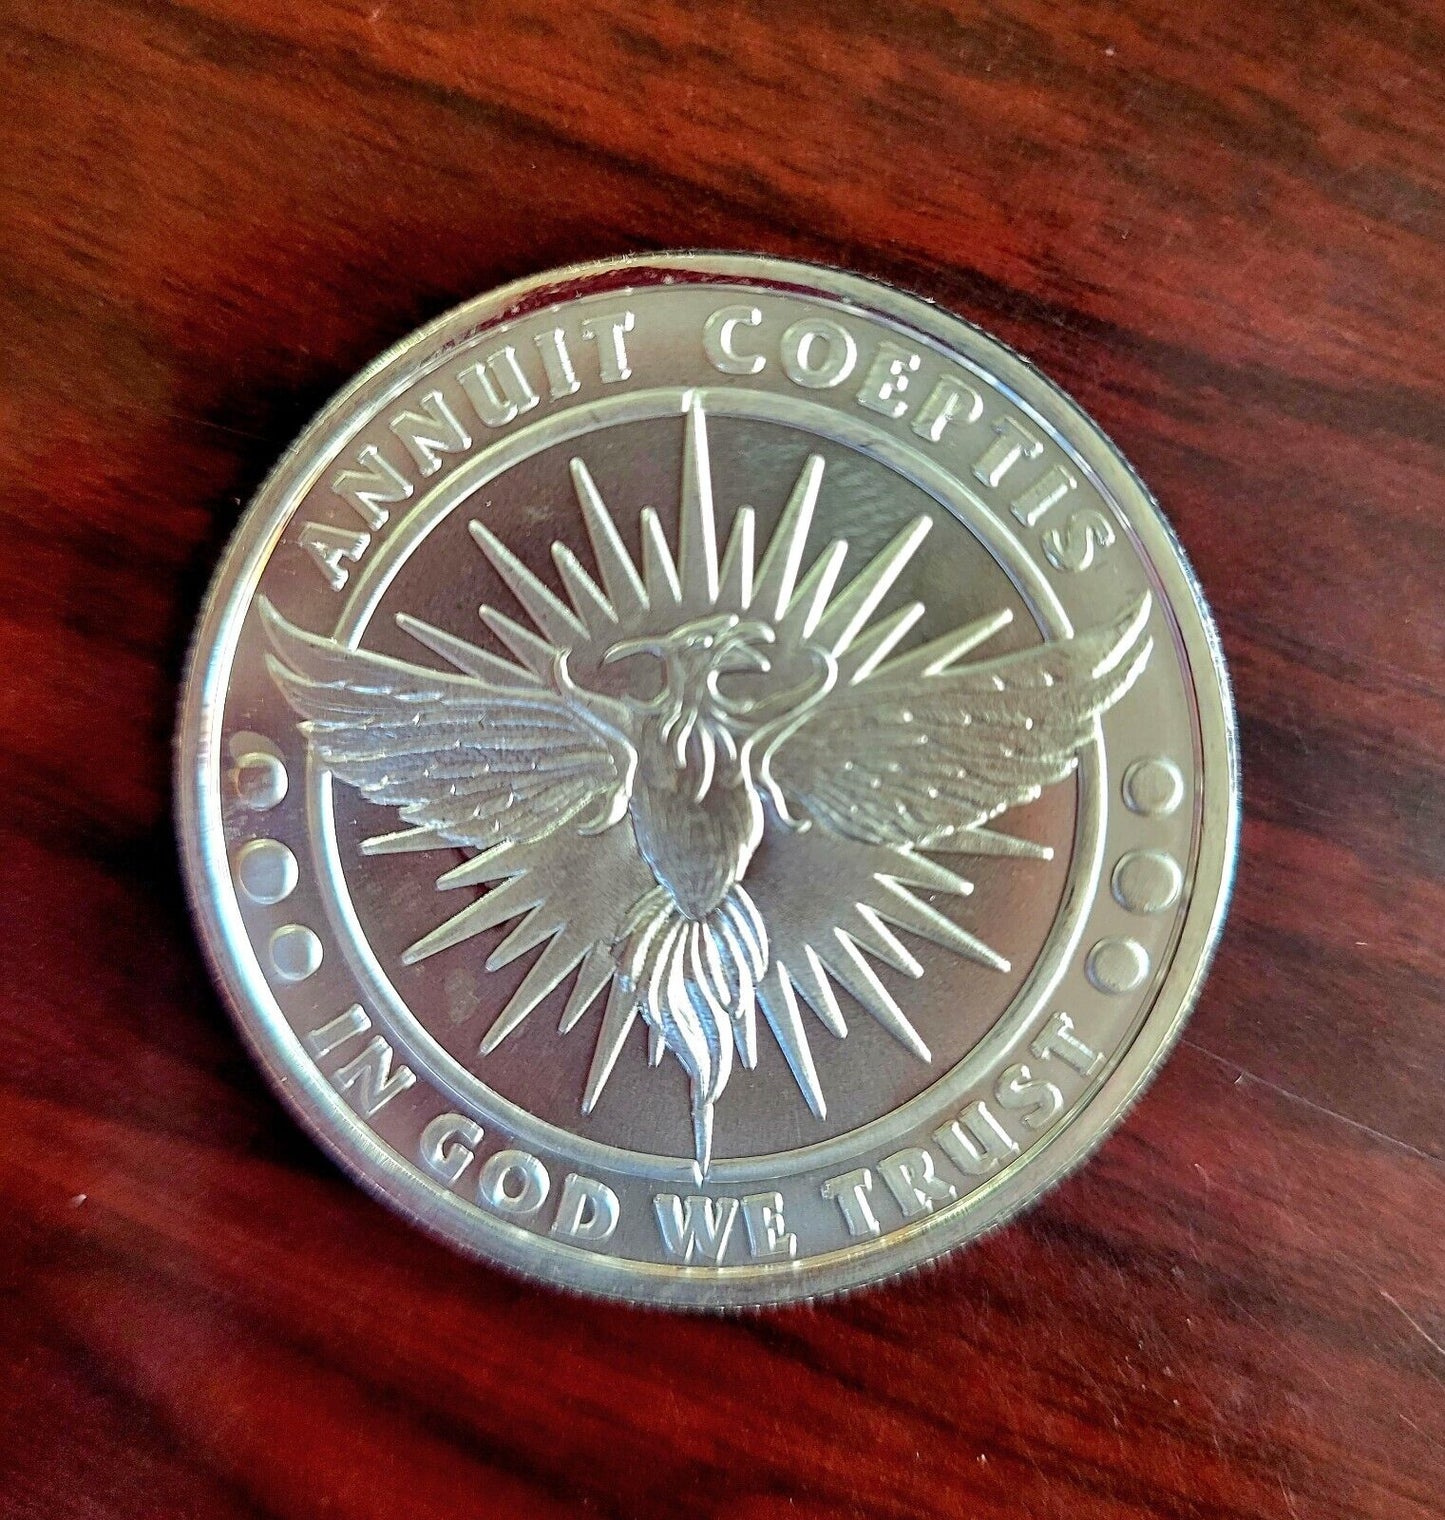 2006 Franklin Squires Annuit Coeptis 1oz .999 Silver Charles Squires Phoenix